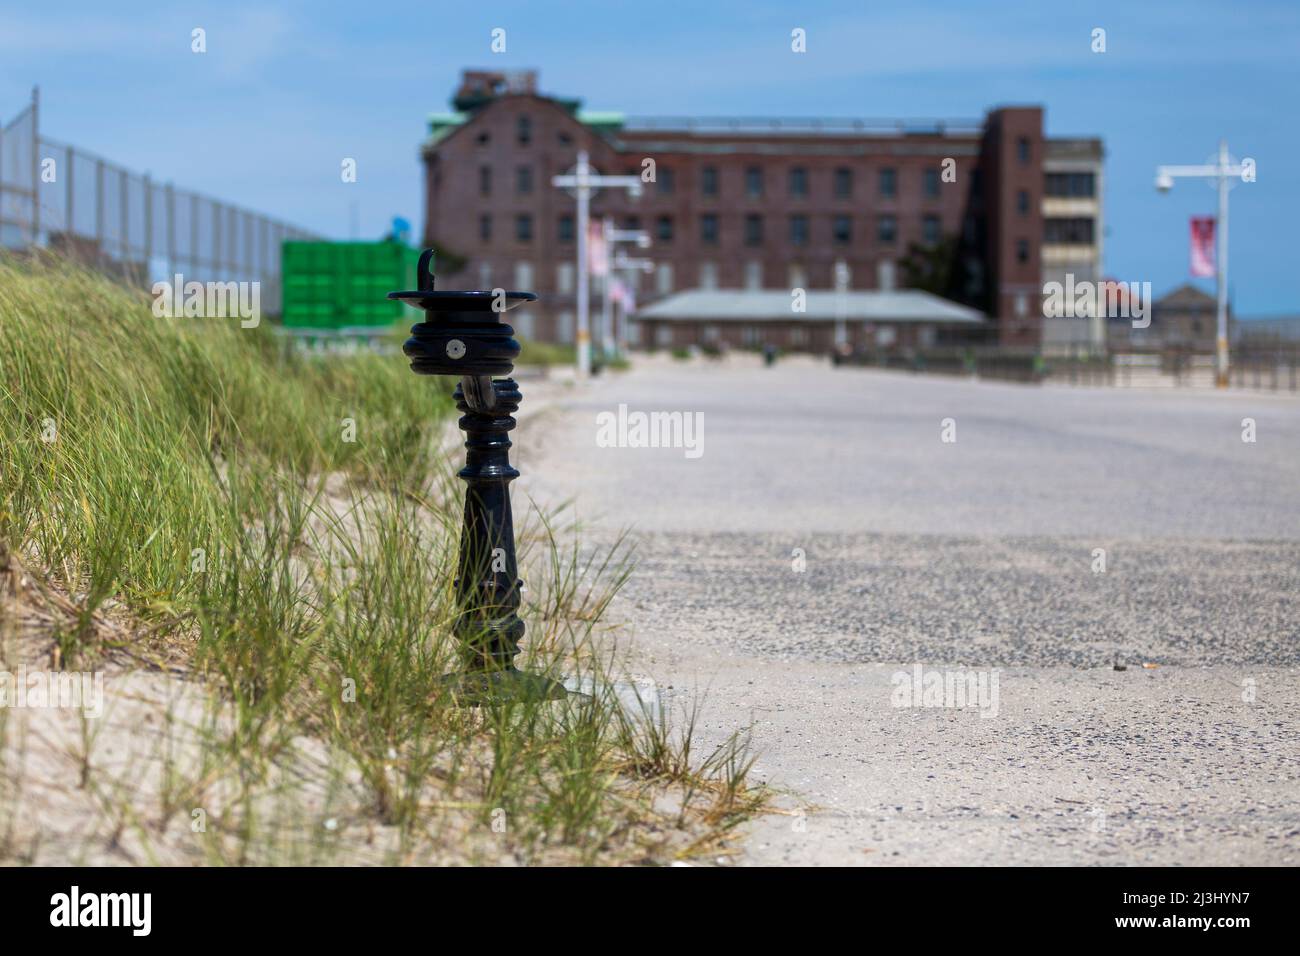 ROCKAWAY PARK, New York City, NY, USA, A water spender and some building in the back Stock Photo